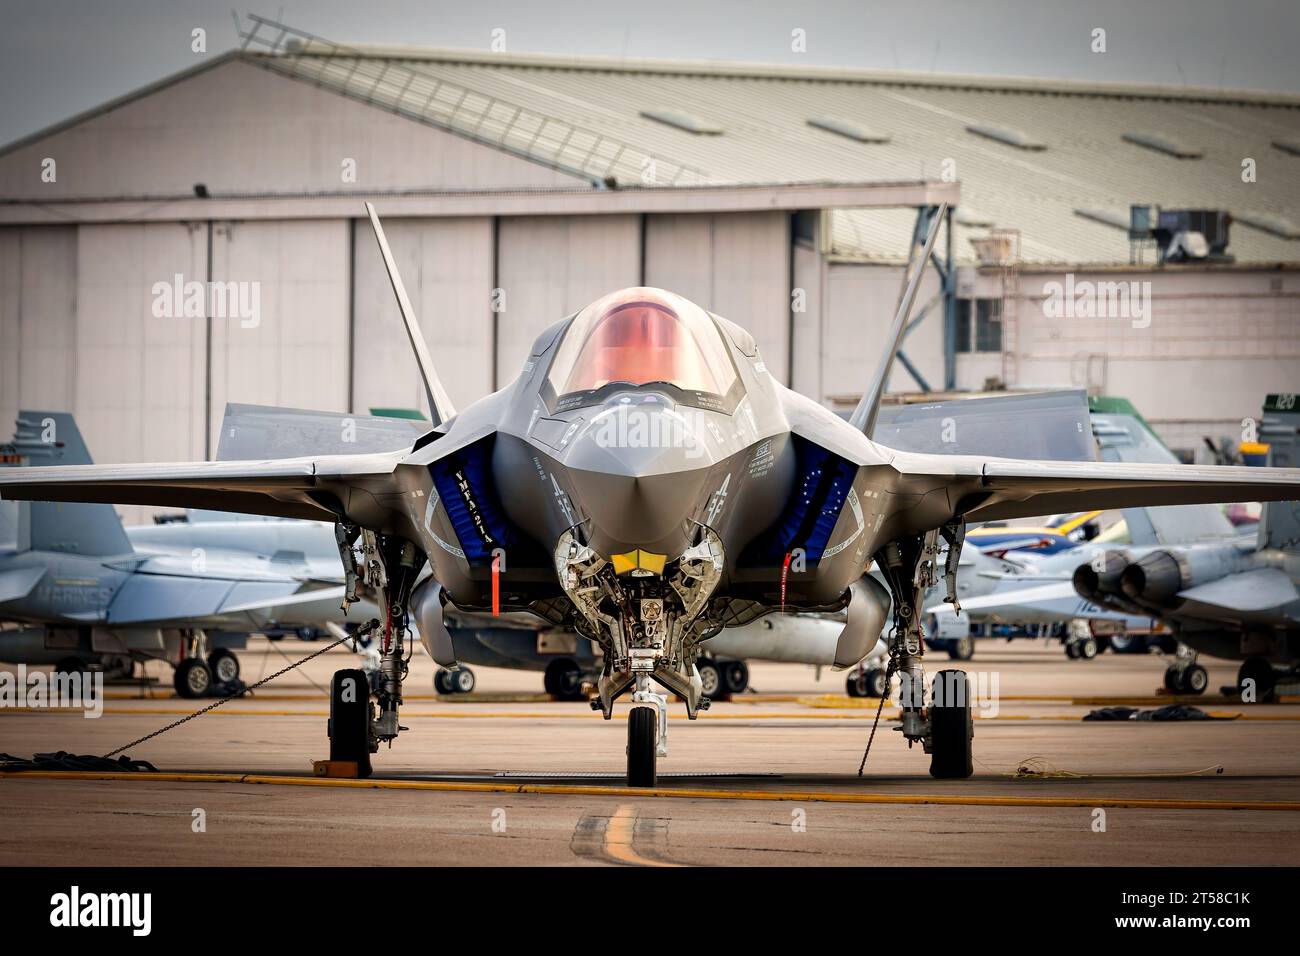 An F-35 Lightning II chained to the tarmac at America's Airshow 2023 in Miramar, California. Stock Photo